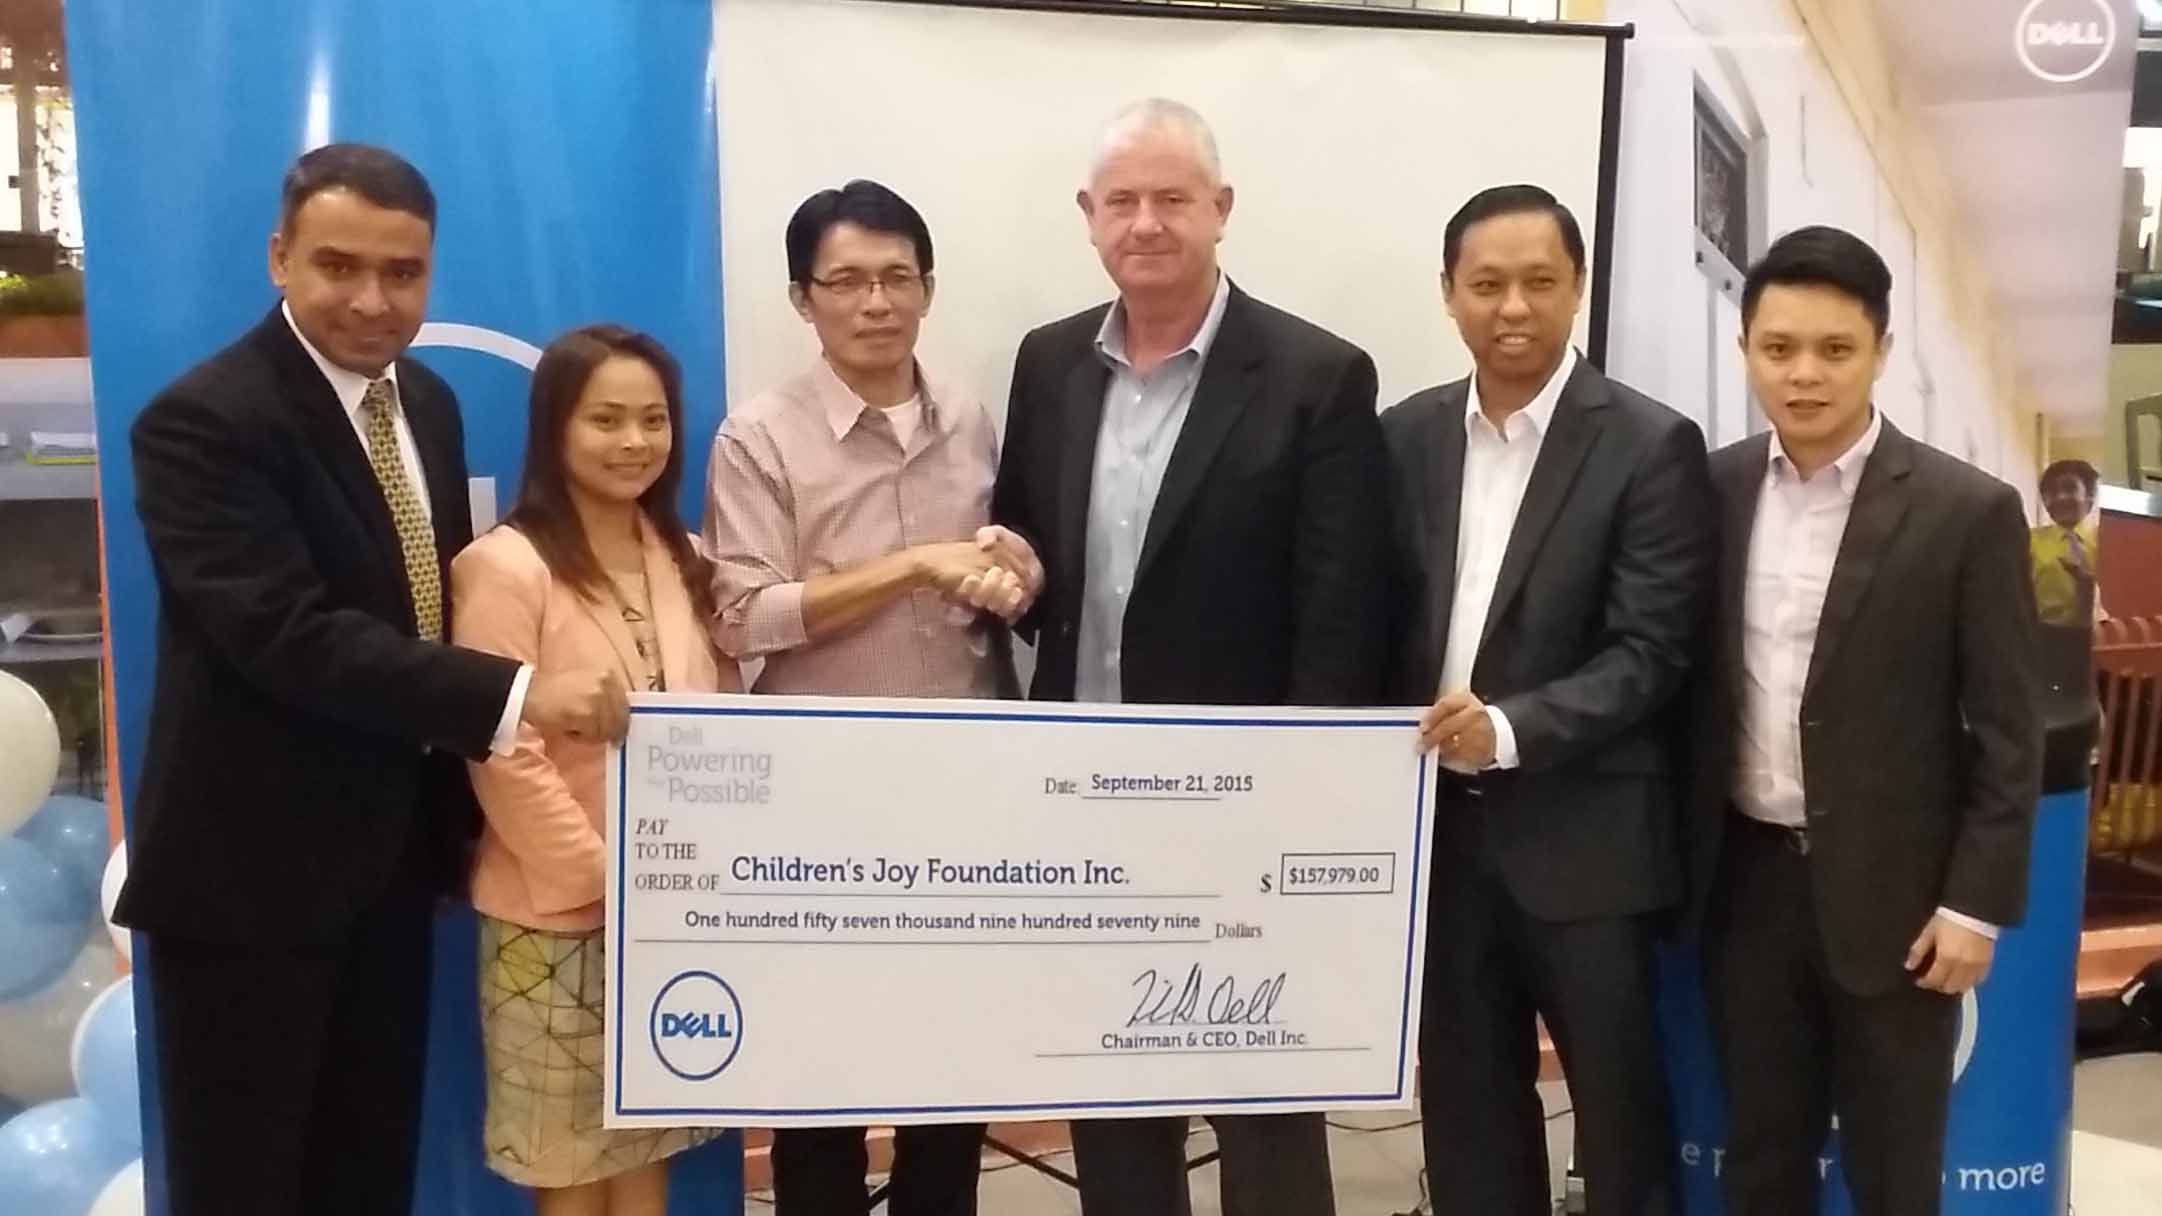 Press Release: Dell Re-affirms commitment to increasing tech access for underserved youth in the Philippines